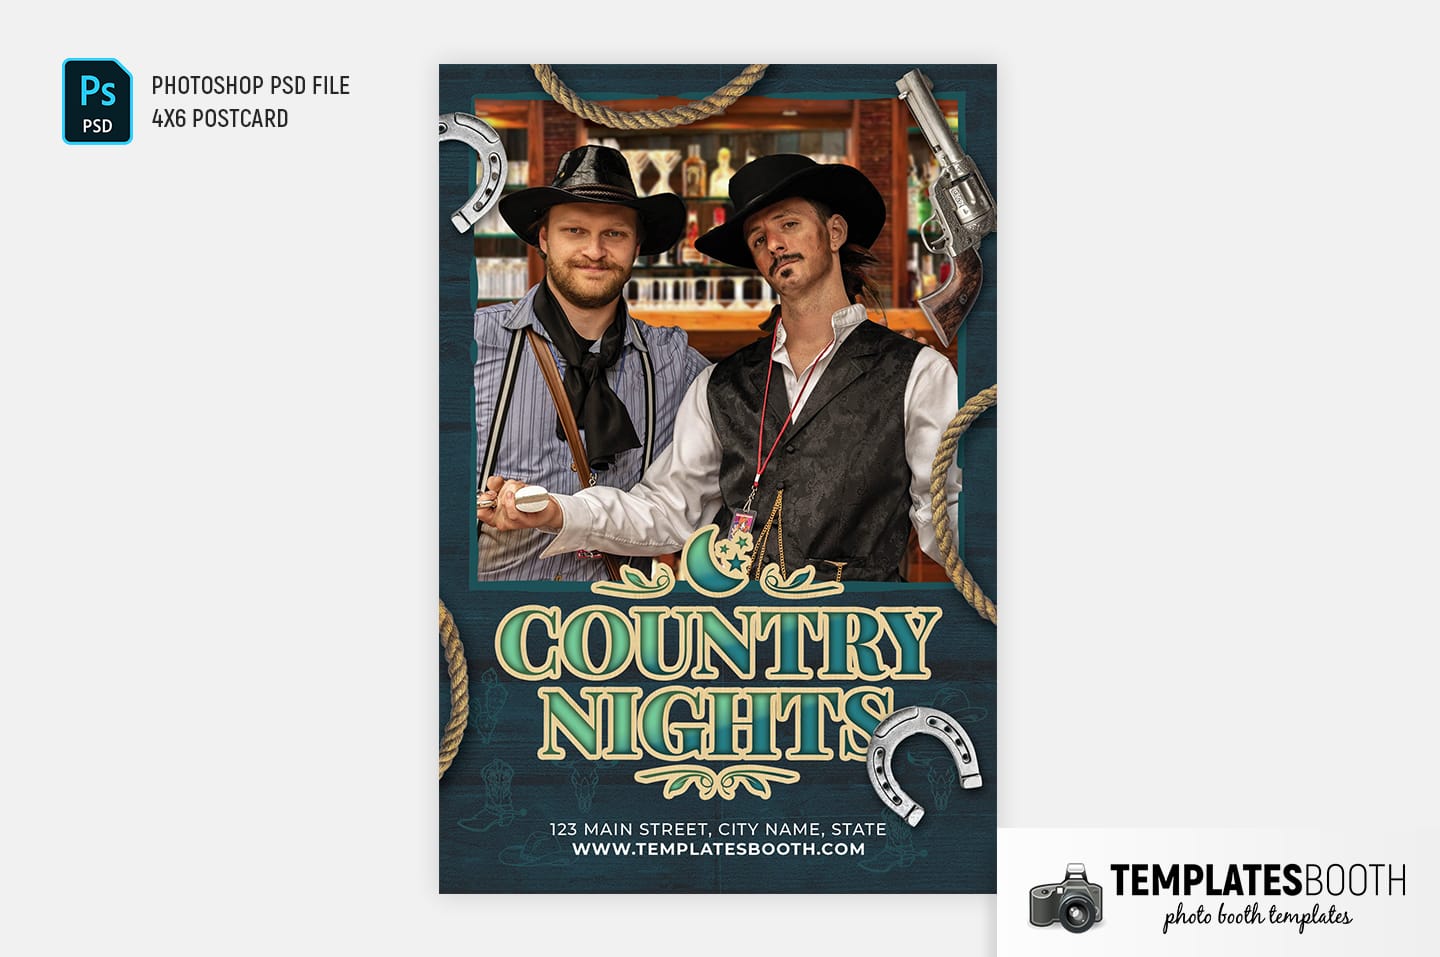 Country Nights Photo Booth Template (4x6 postcard portrait)